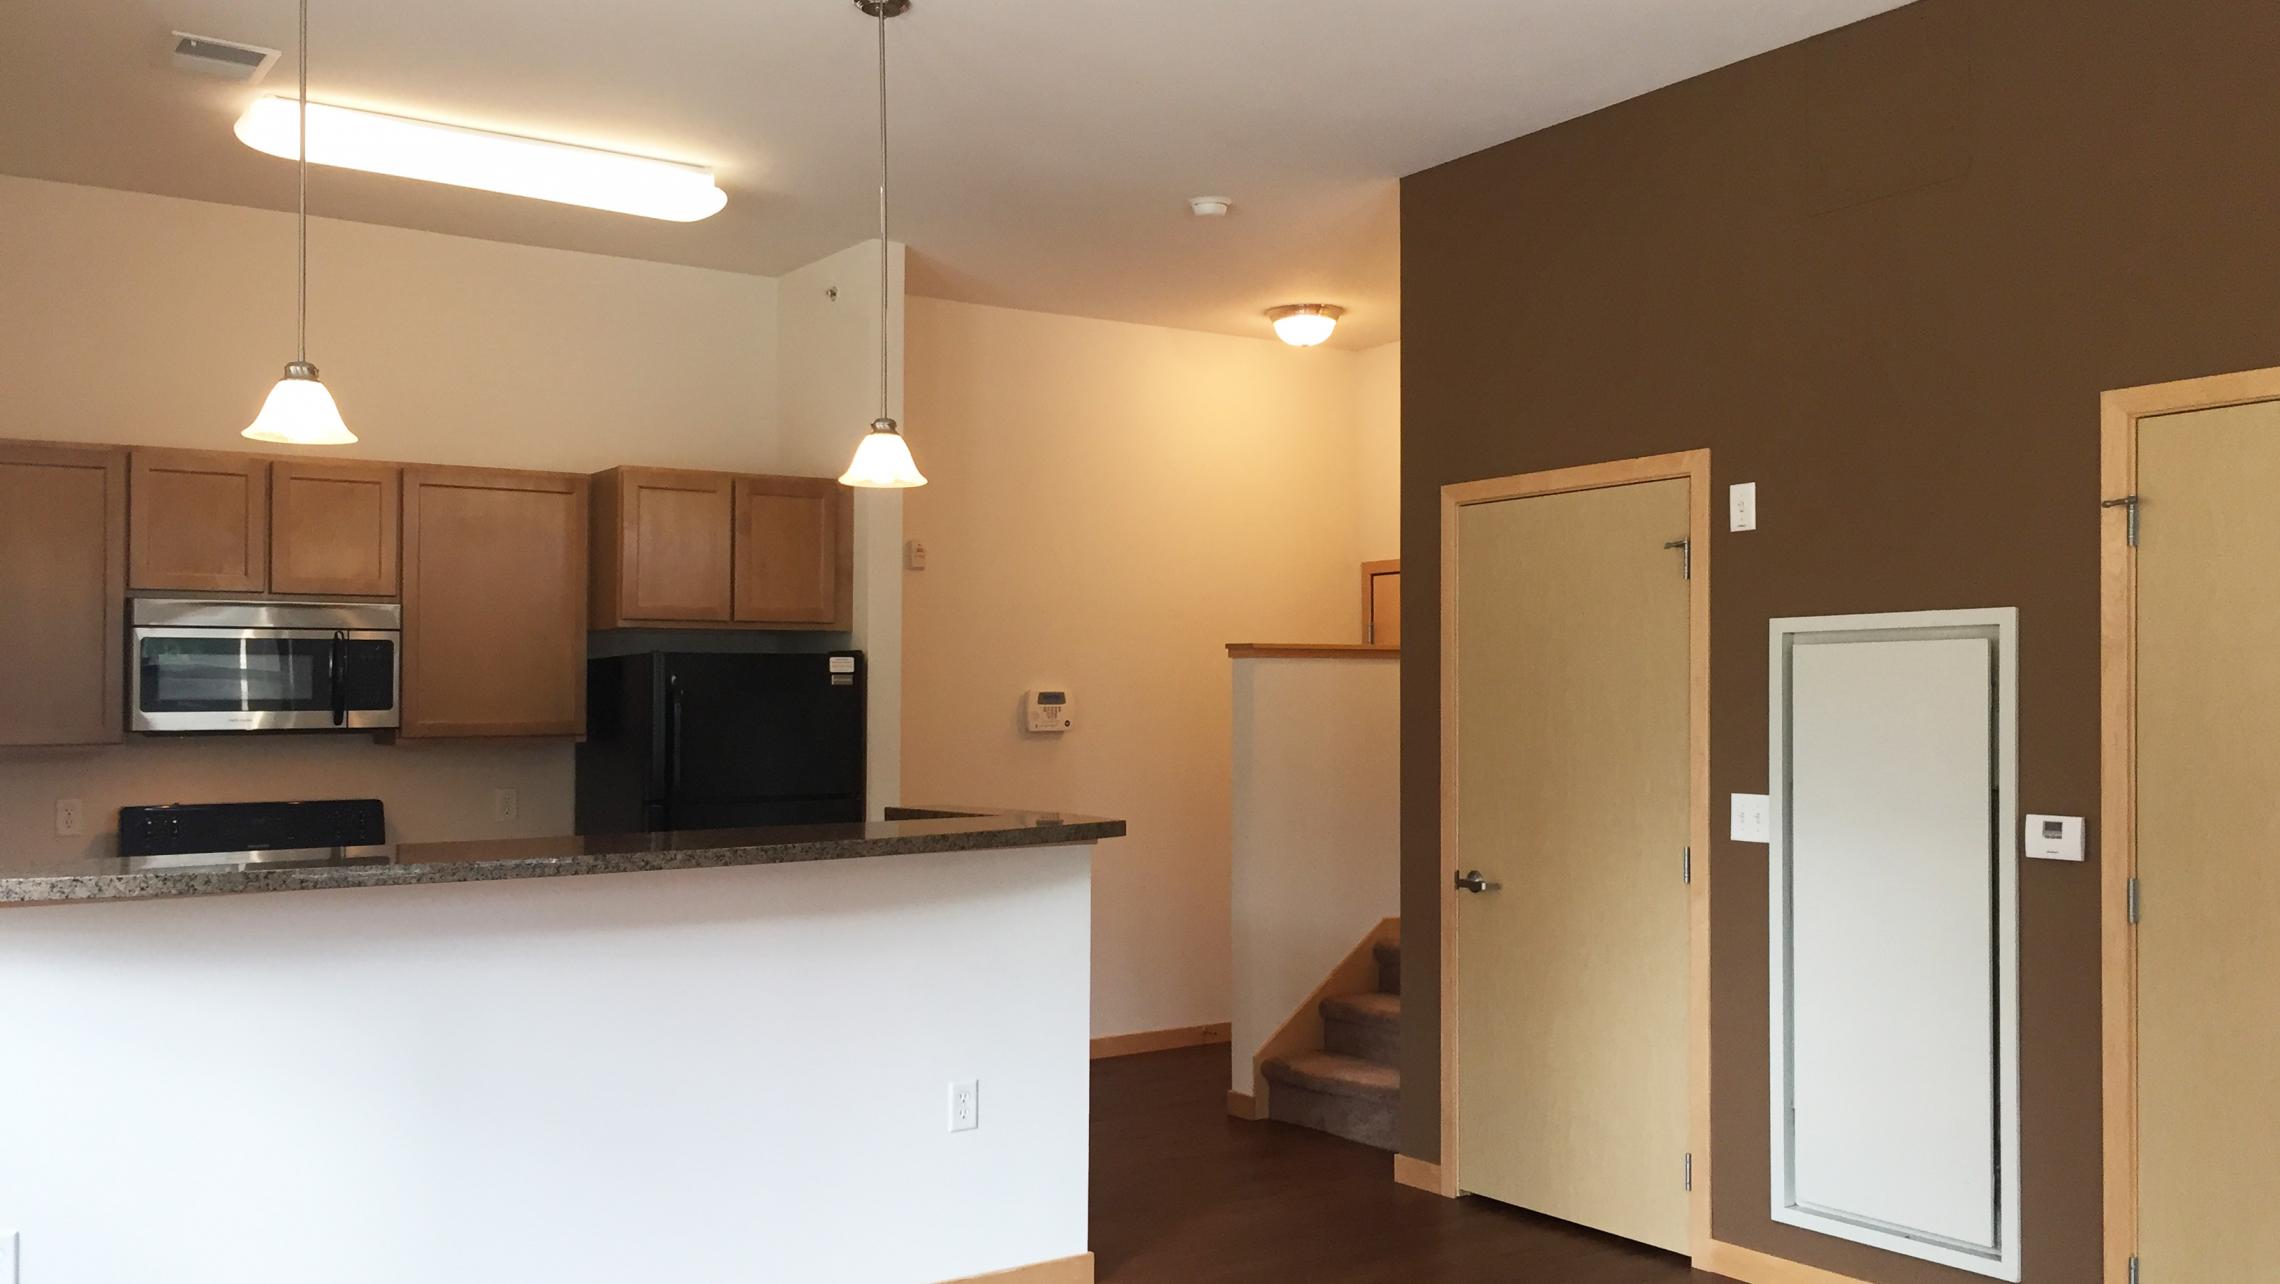 The-Depot-Apartment-3-608-Two-Bedroom-Townhome-Kitchen-Living-Bathroom-Bathtub-Rooftop-Terrace-Fitness-Downtown-Madison-Capitol-Bike-Trails-Cats-Lifestyle-City-Lake-Balcony-Views